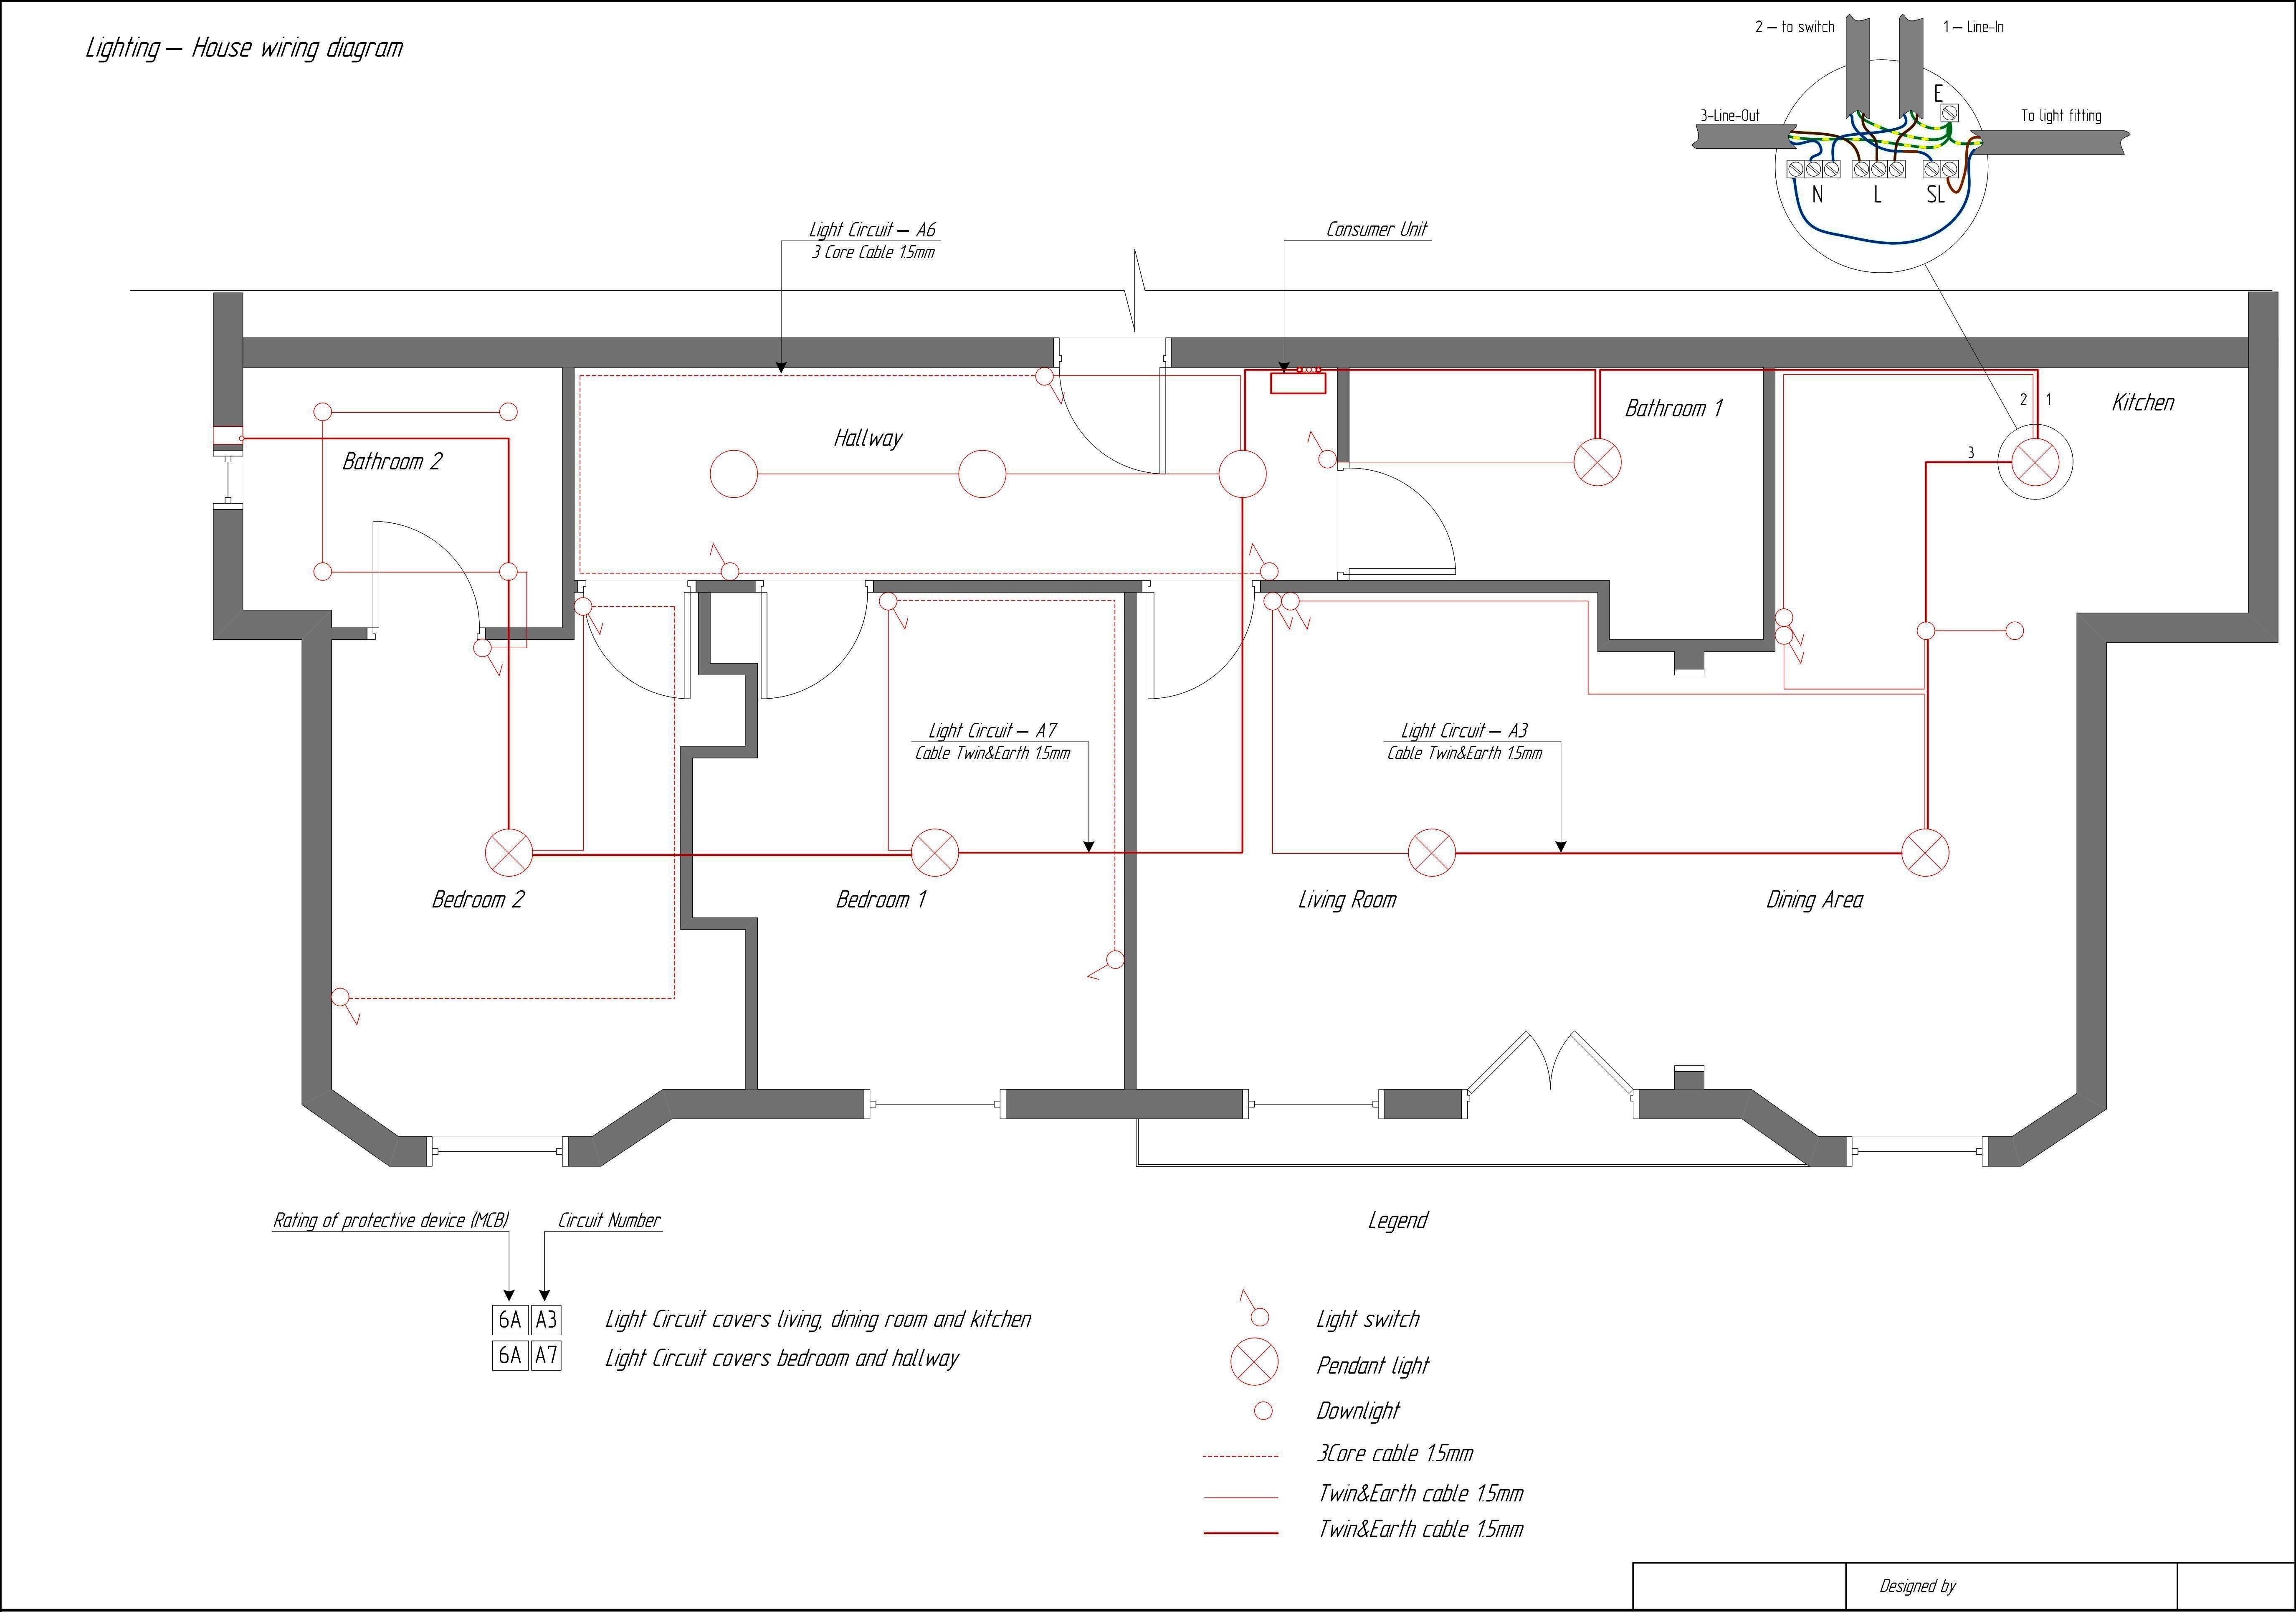 Wiring Diagram Apps New House Wiring Diagram Electrical Floor Plan 2004 2010 Bmw X3 E83 3 0d